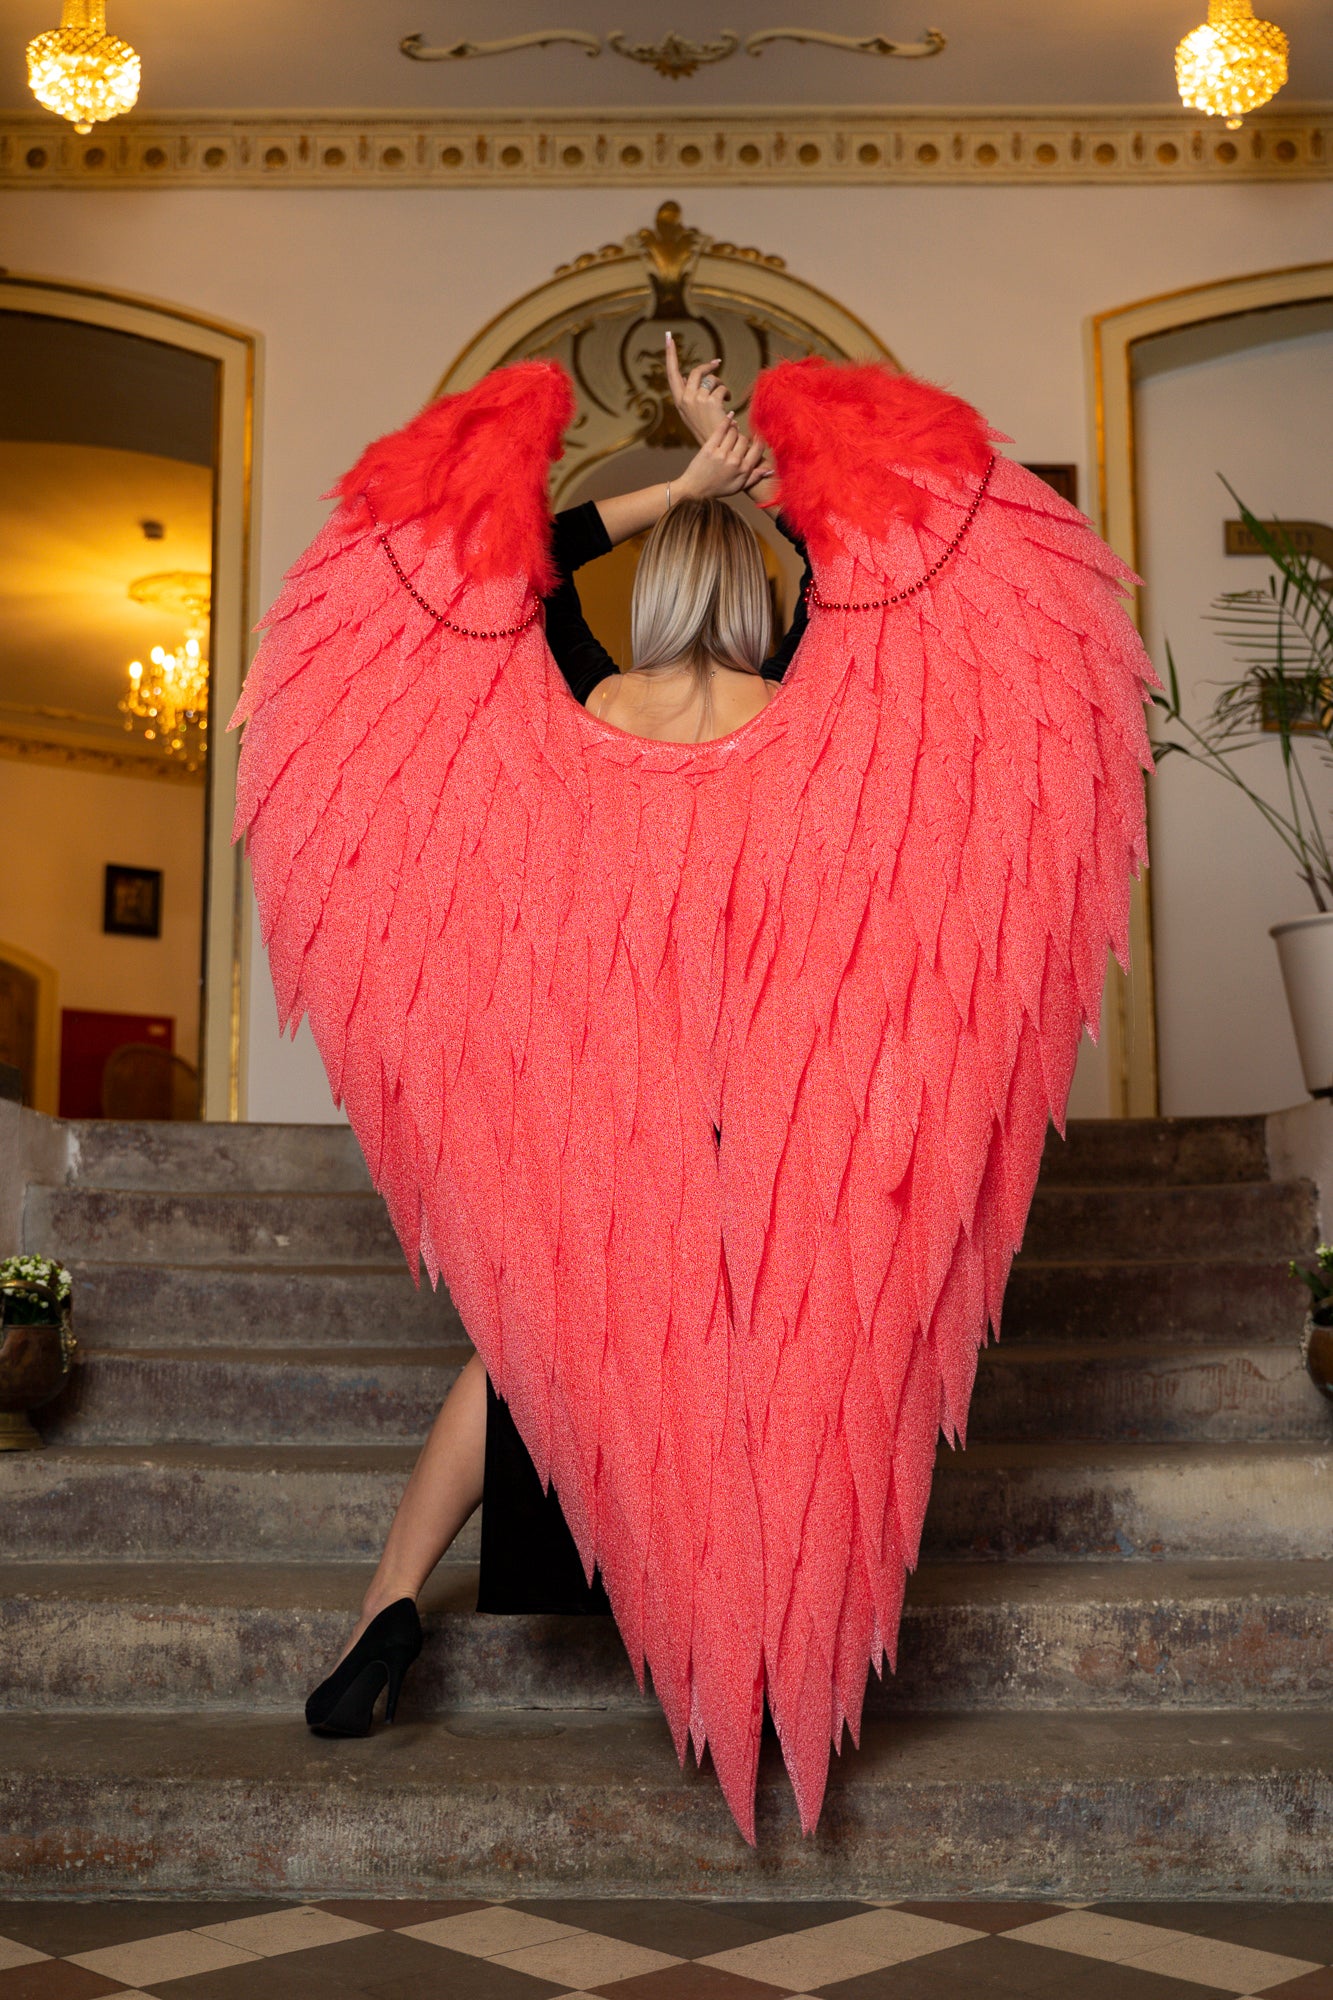 Cosplay ailes d'ange rouge "marque Bogacci" 